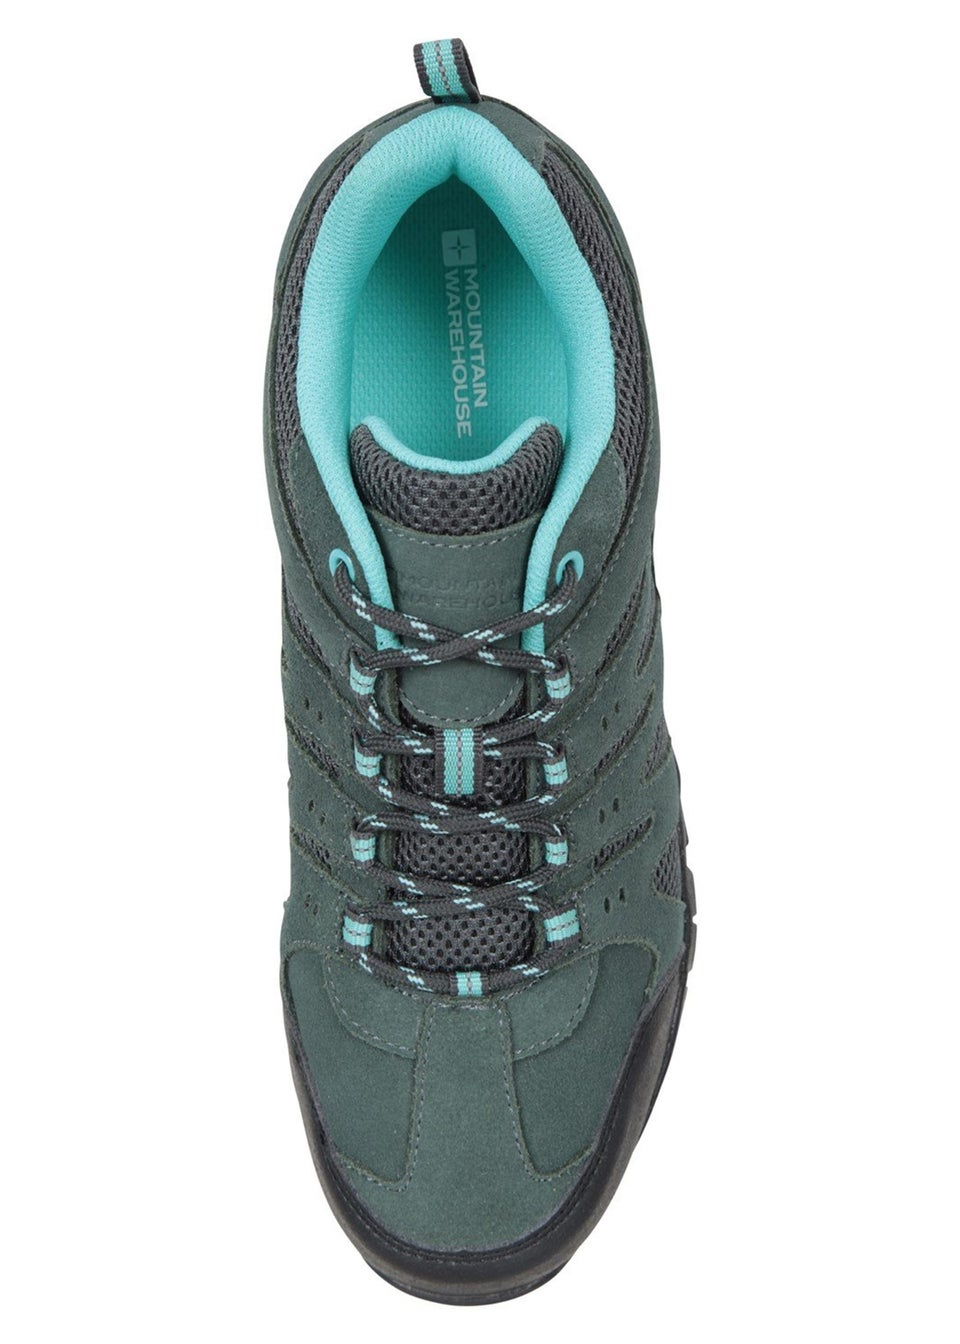 Mountain Warehouse Ink Blue Suede Outdoor Walking Shoes